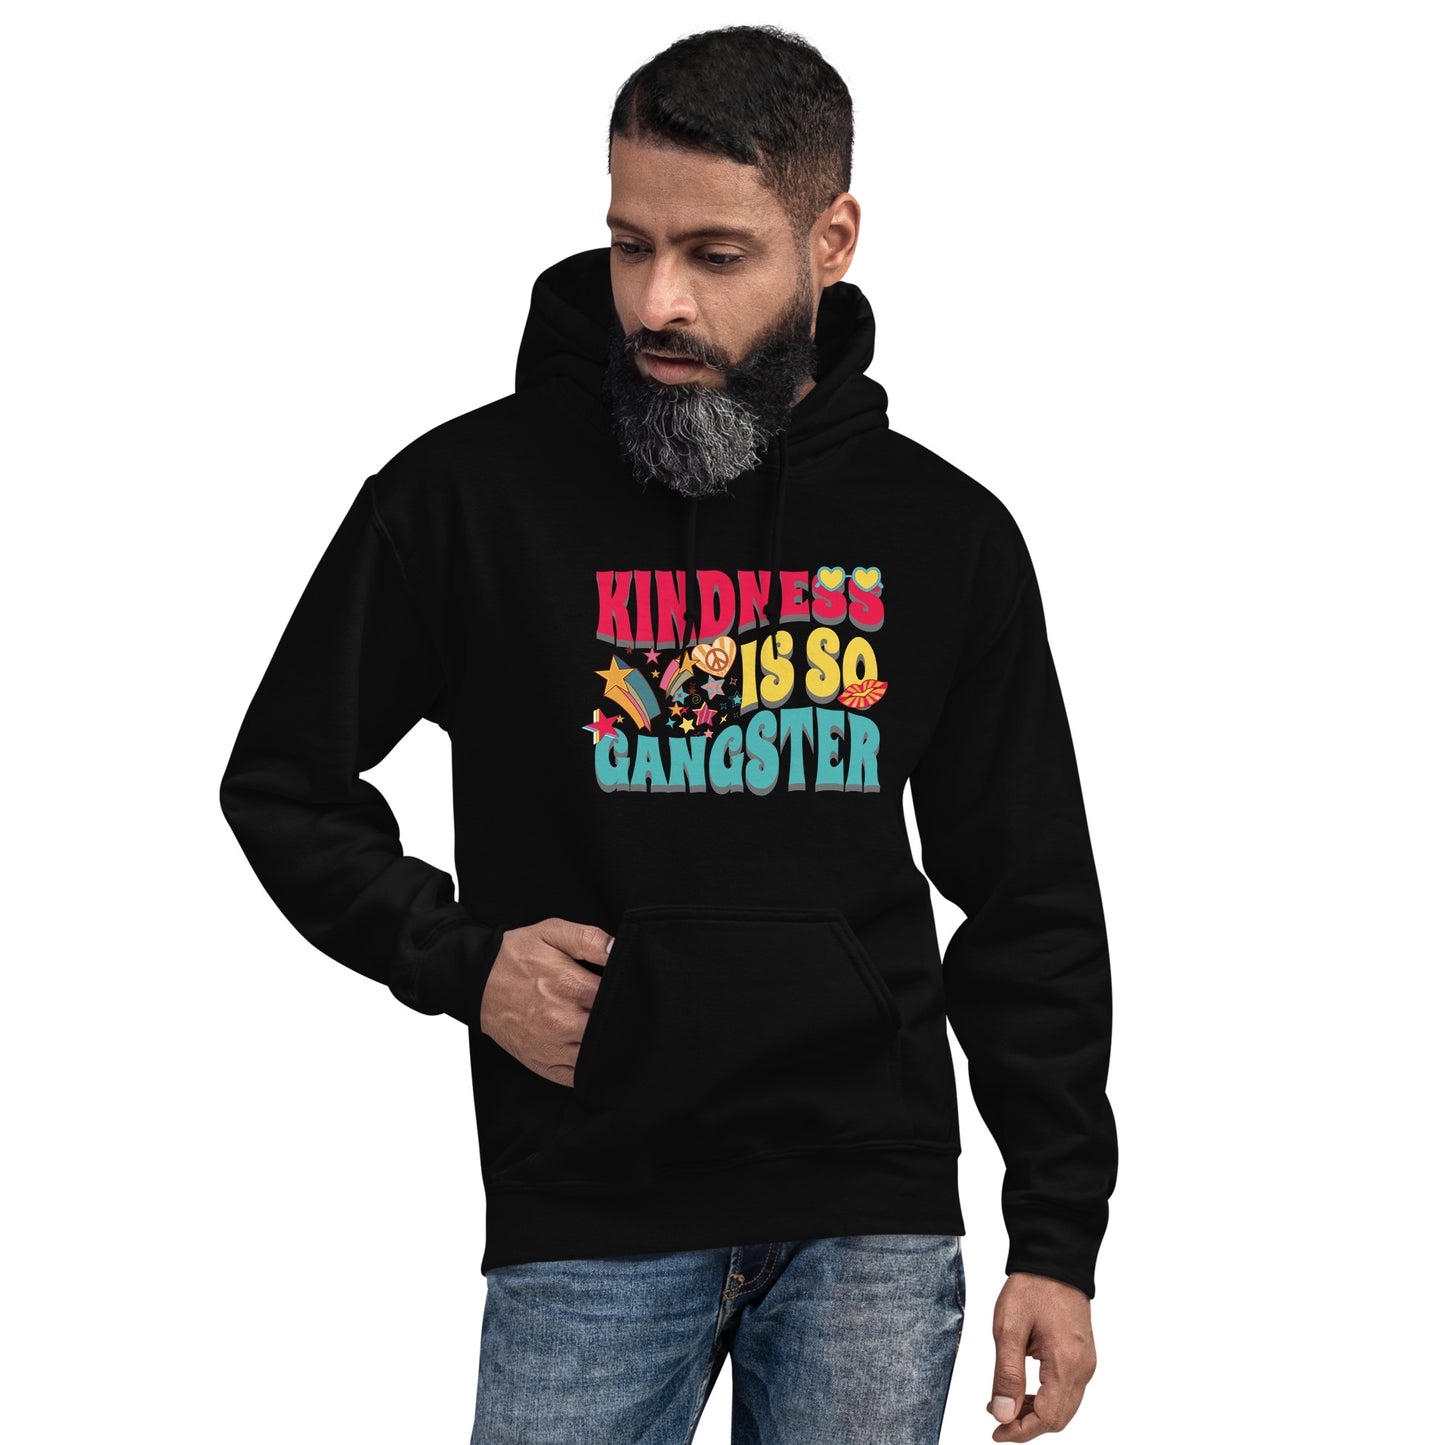 Kindness Is So Gangster Retro Unisex Hoodie